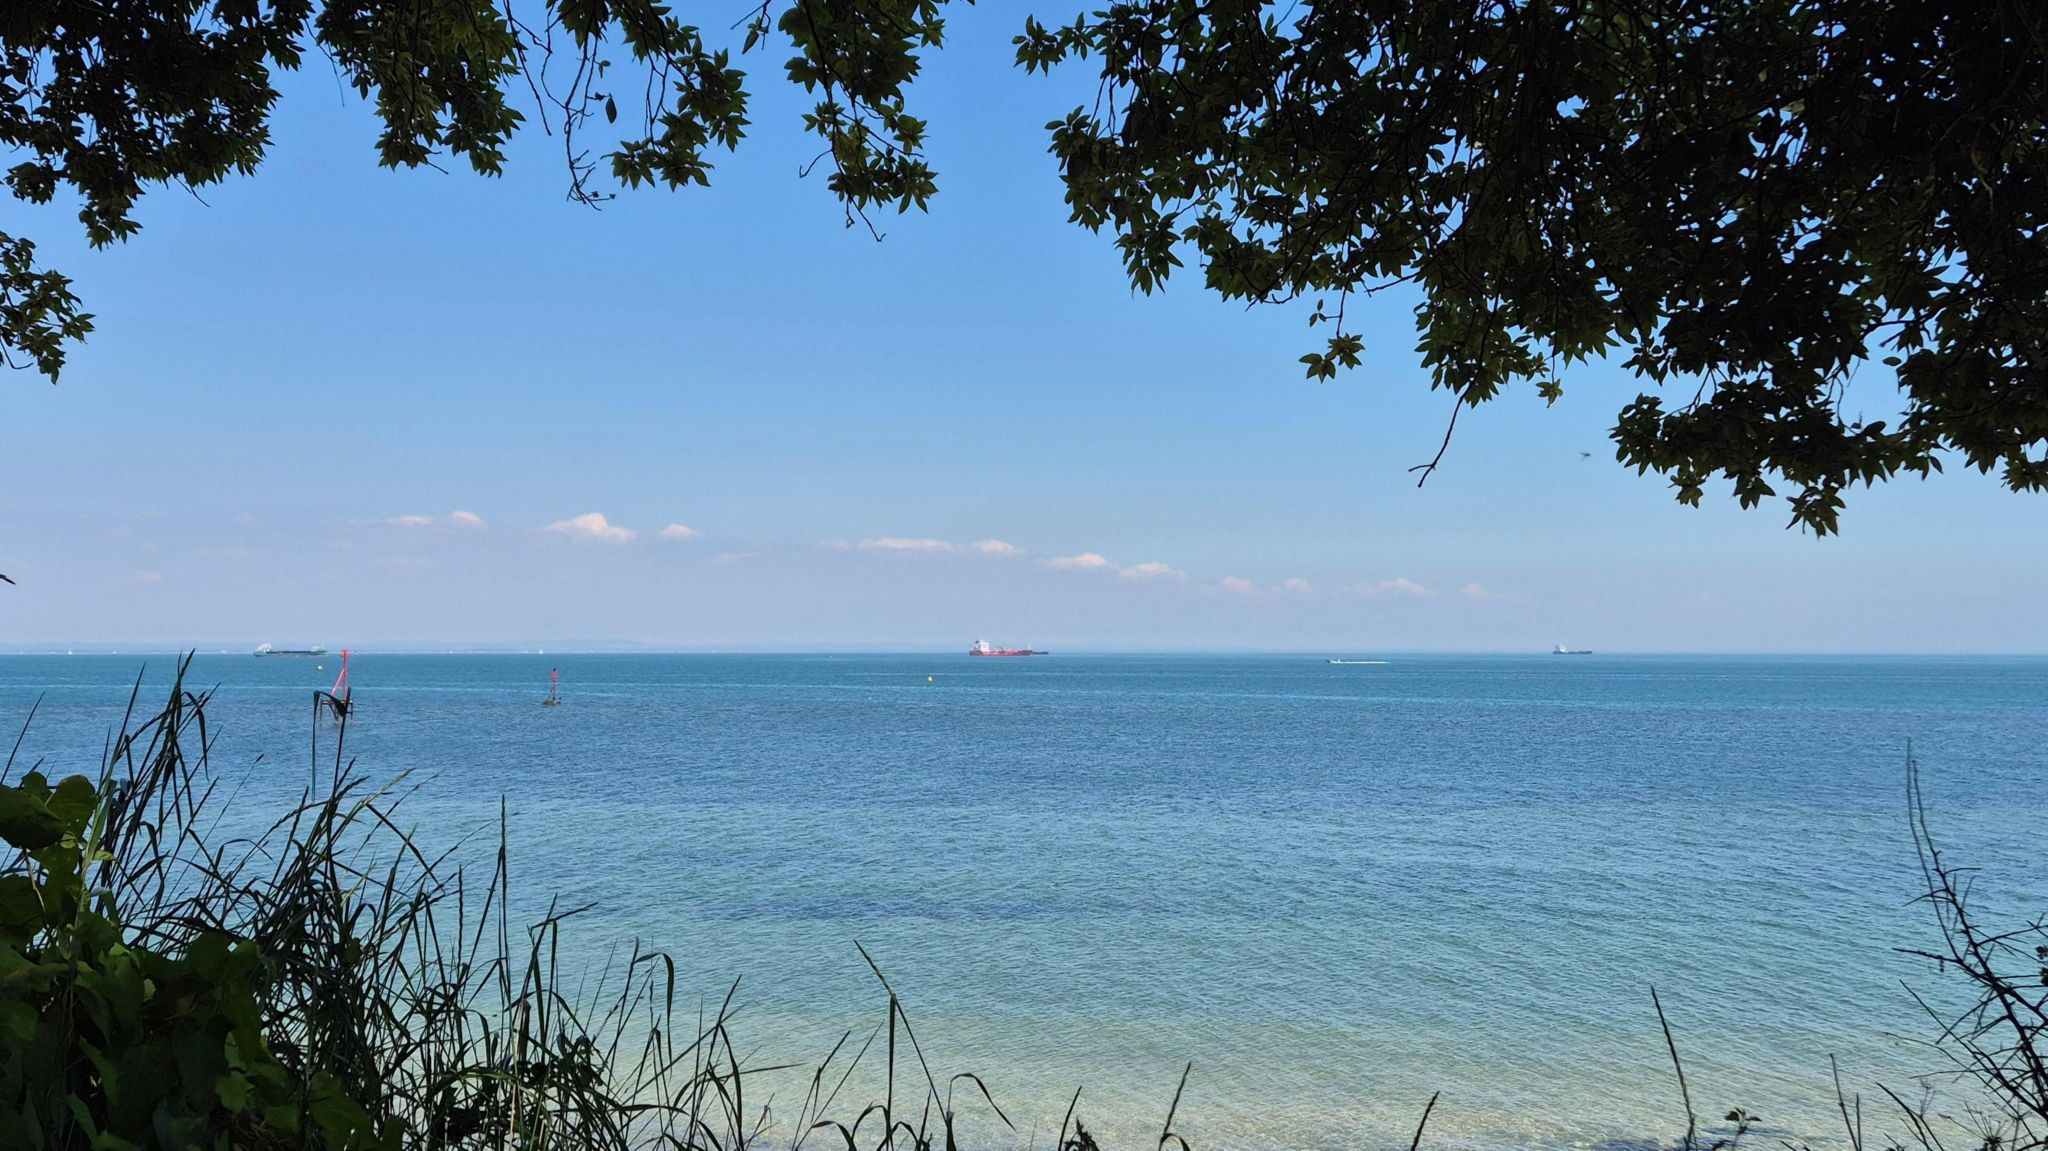 A view of the bright blue sea on a sunny day with blue skies. Taken from Bembridge showing a boat on the horizon and with the picture framed by trees above and grass below